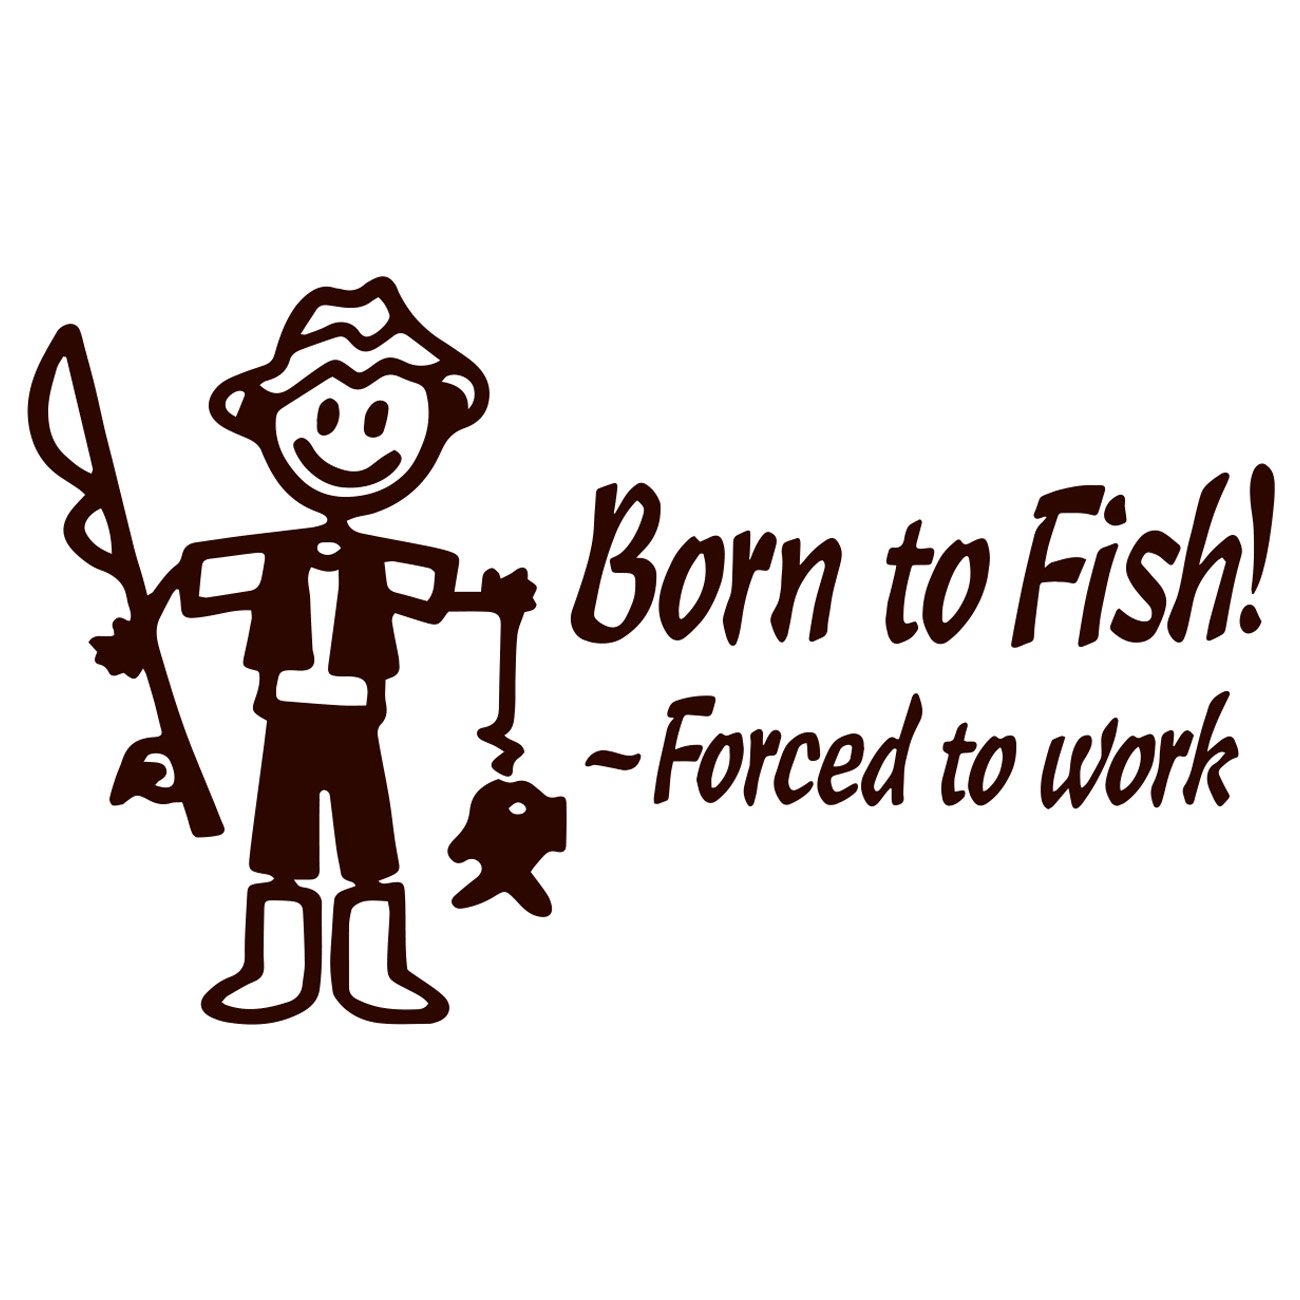 Born to fish - Forced to work